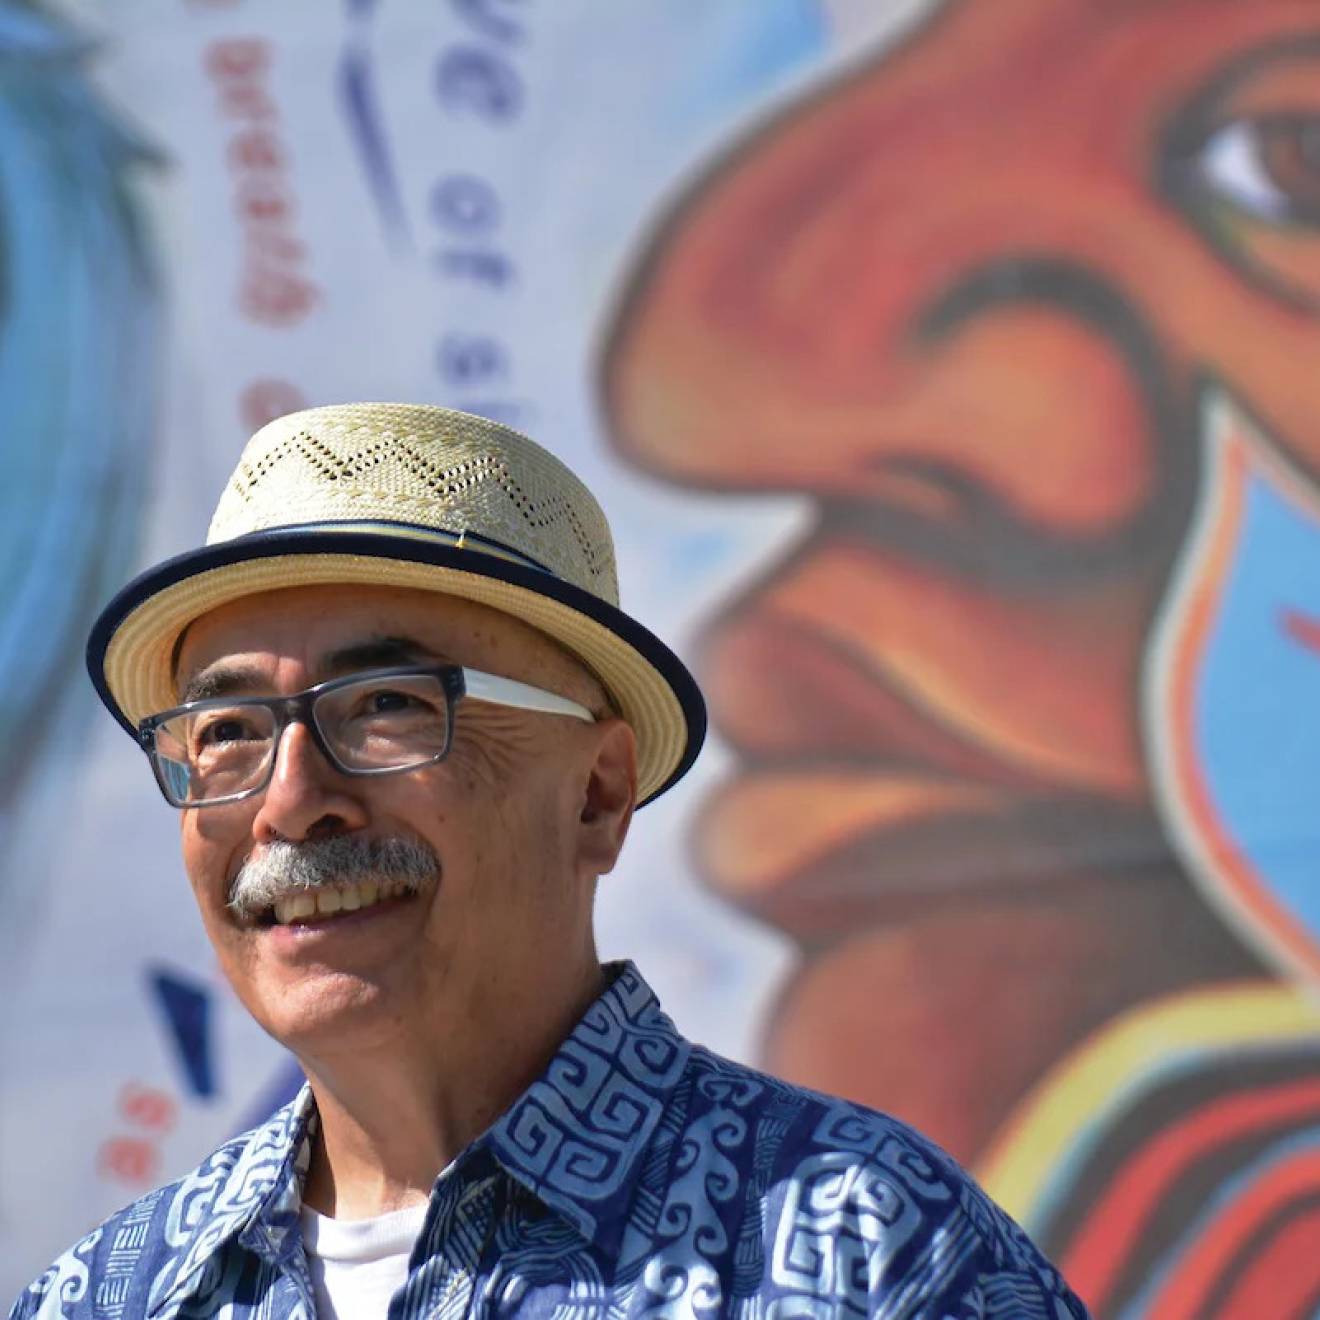 An older Latino man with a mustache, glasses and a jaunty hat in front of a colorful mural